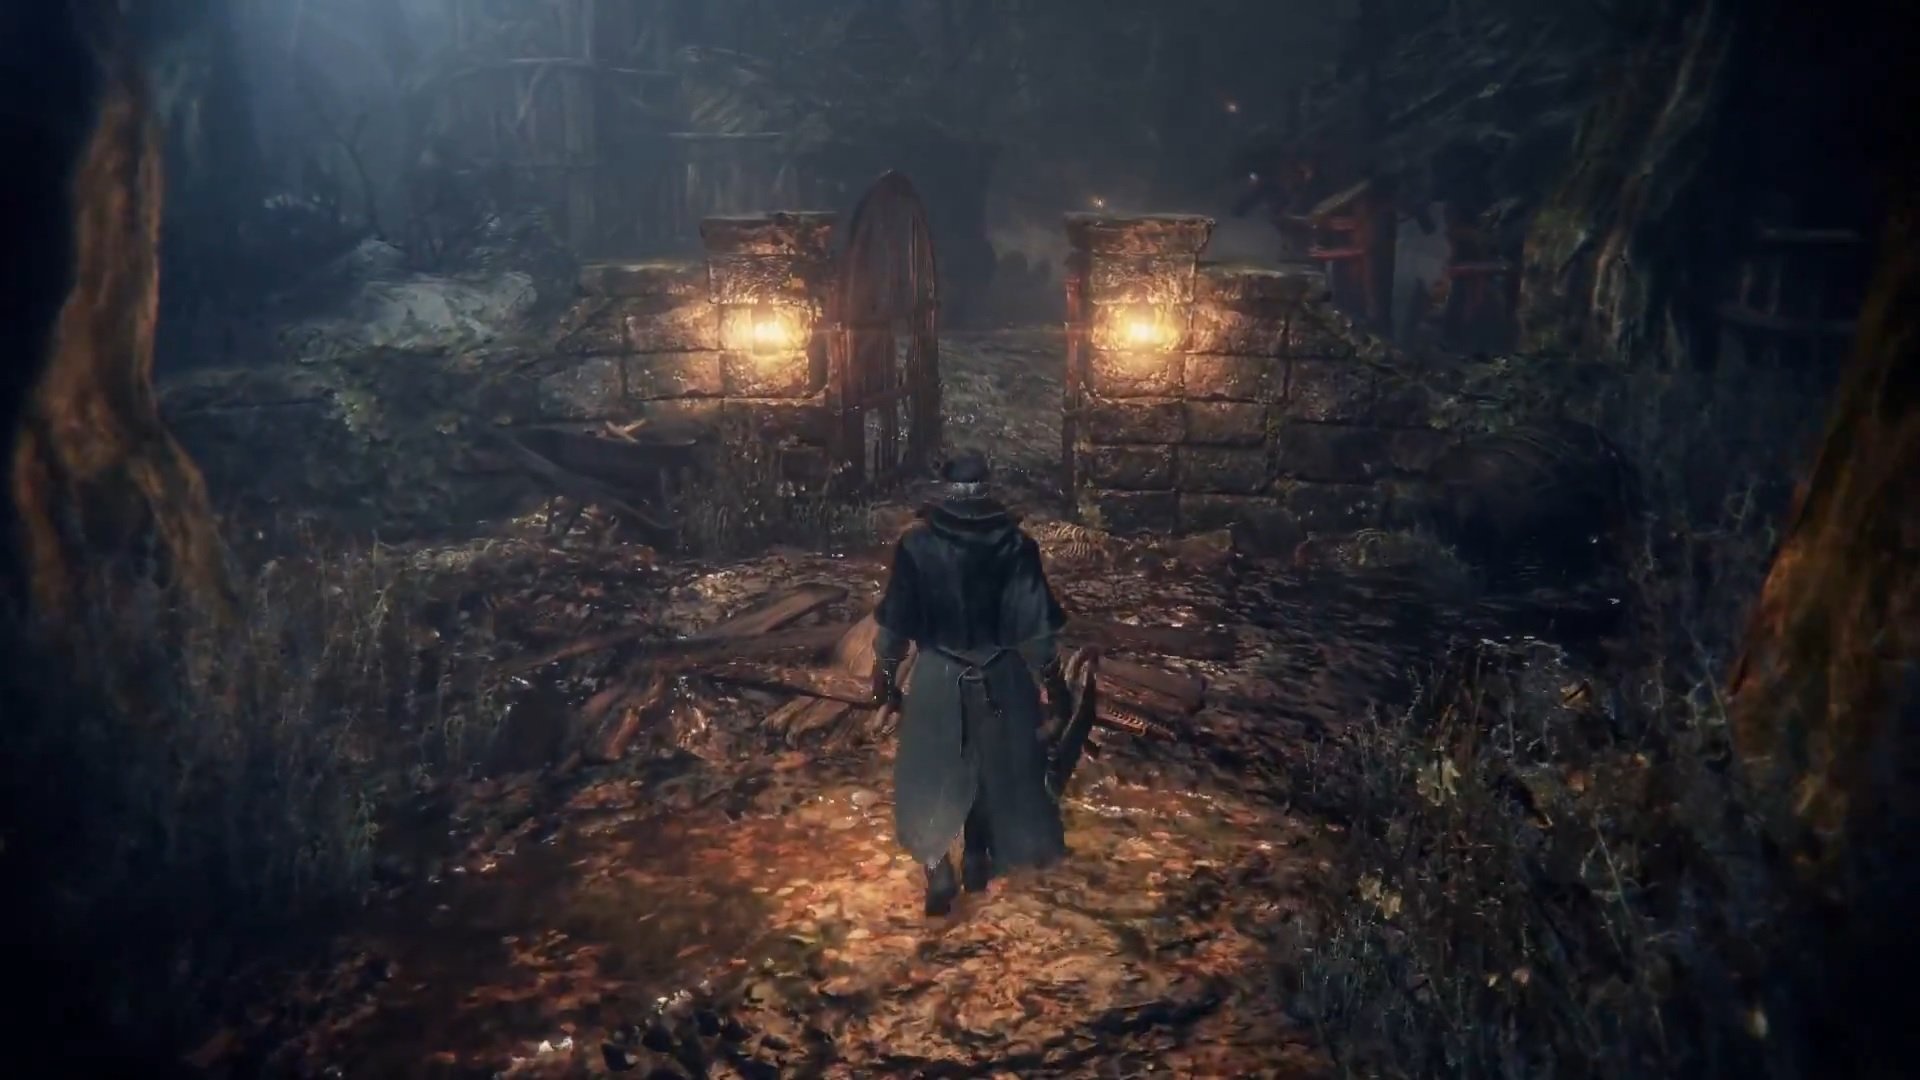 What's new in Bloodborne PSX's latest 1.05 update?